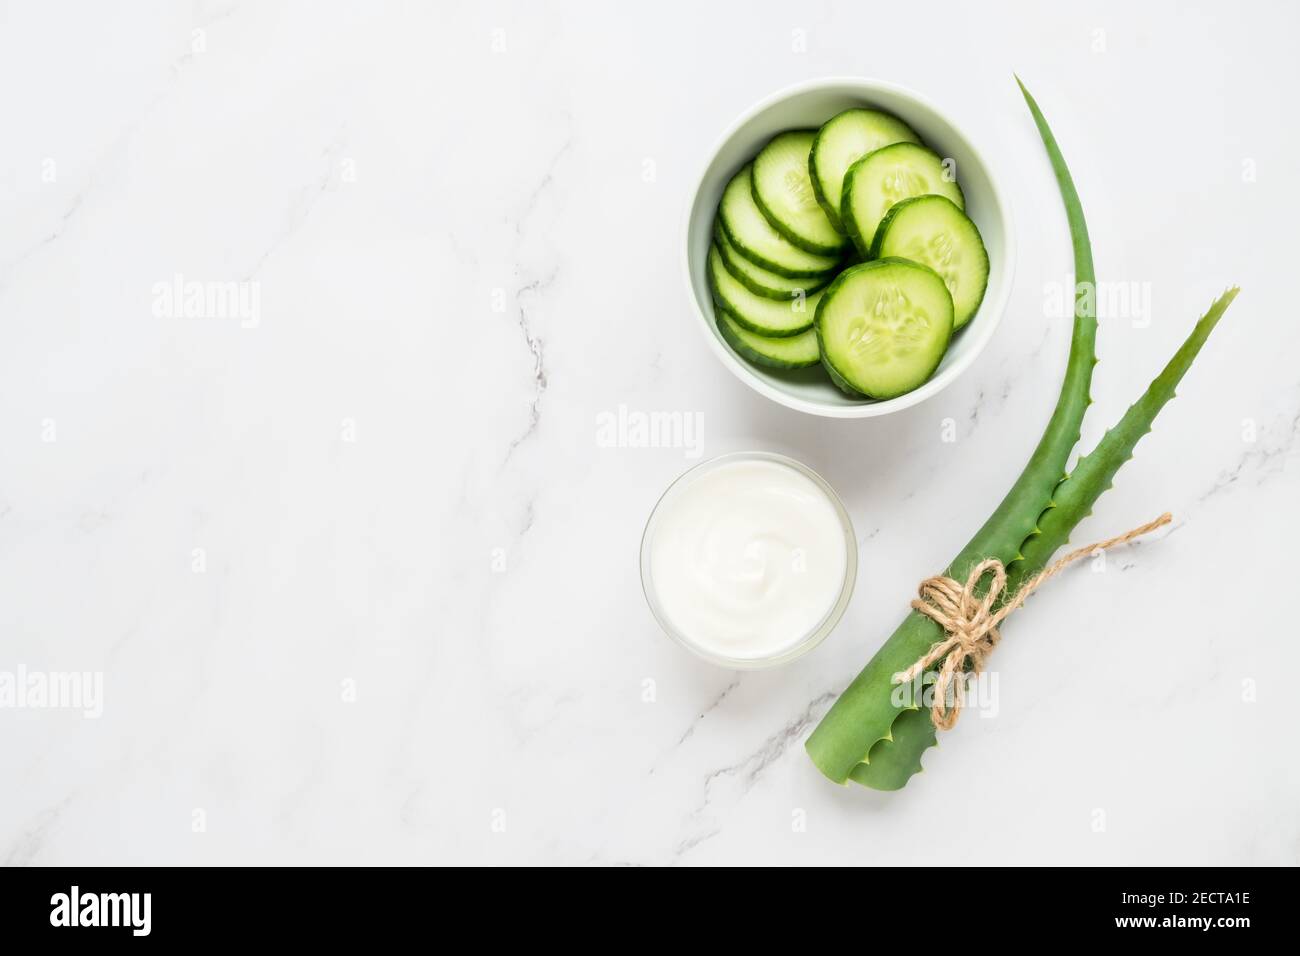 Homemade skin care concept. Green natural ingredients aloe vera, yogurt, cucumber for making a cosmetic mask on a light background Stock Photo